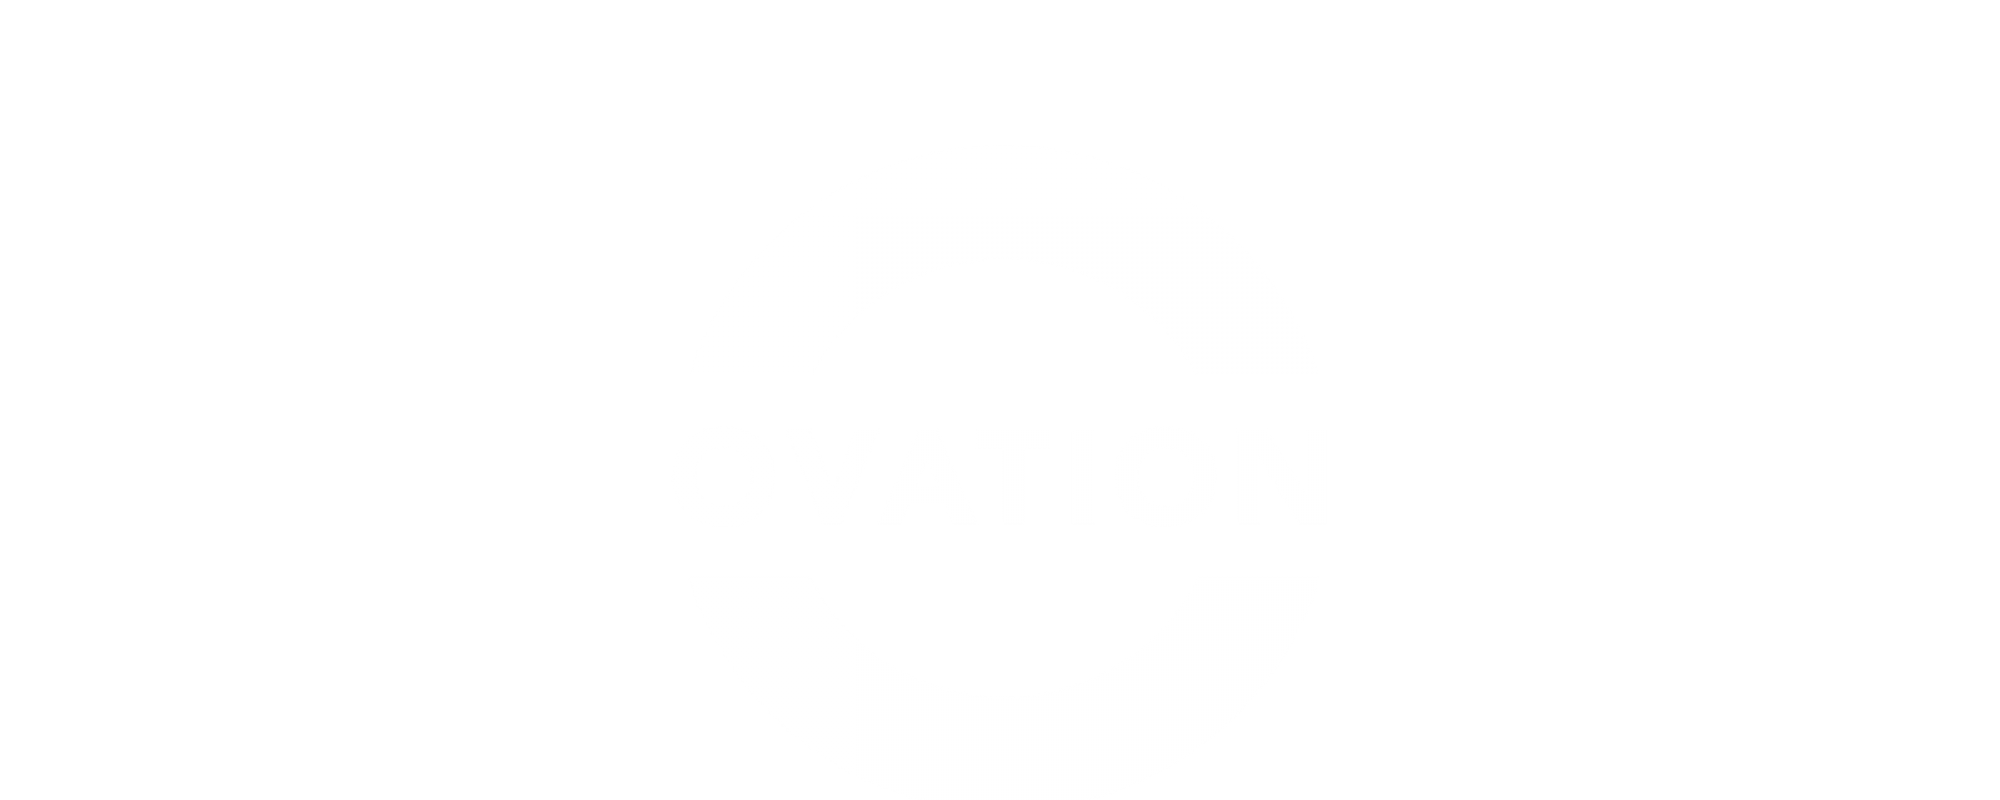 OVATION TV DONATES $5,000 TO NYC’S BIRDLAND JAZZ CLUB AS PANDEMIC SHUTDOWN THREATENS THE ICONIC VENUE WITH PERMANENT CLOSURE